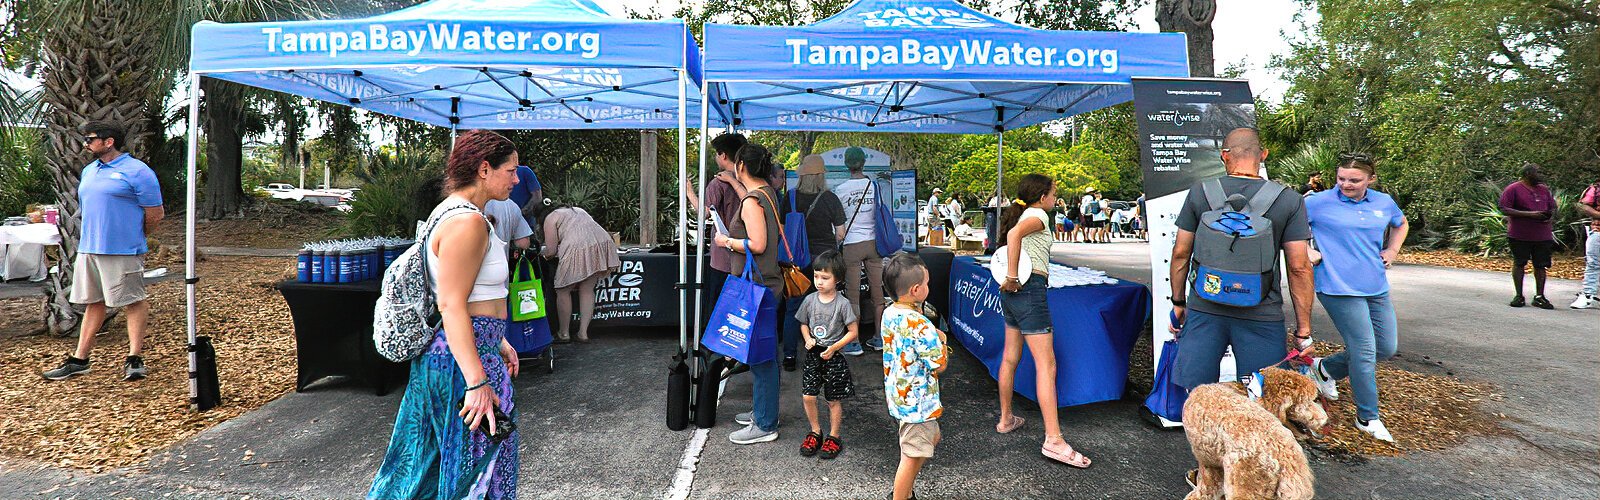 Giving away water bottles and shower timers, Tampa Bay Water encourages visitors to protect our drinking water sources and be “water wise” in our utilization of water to save and conserve it.